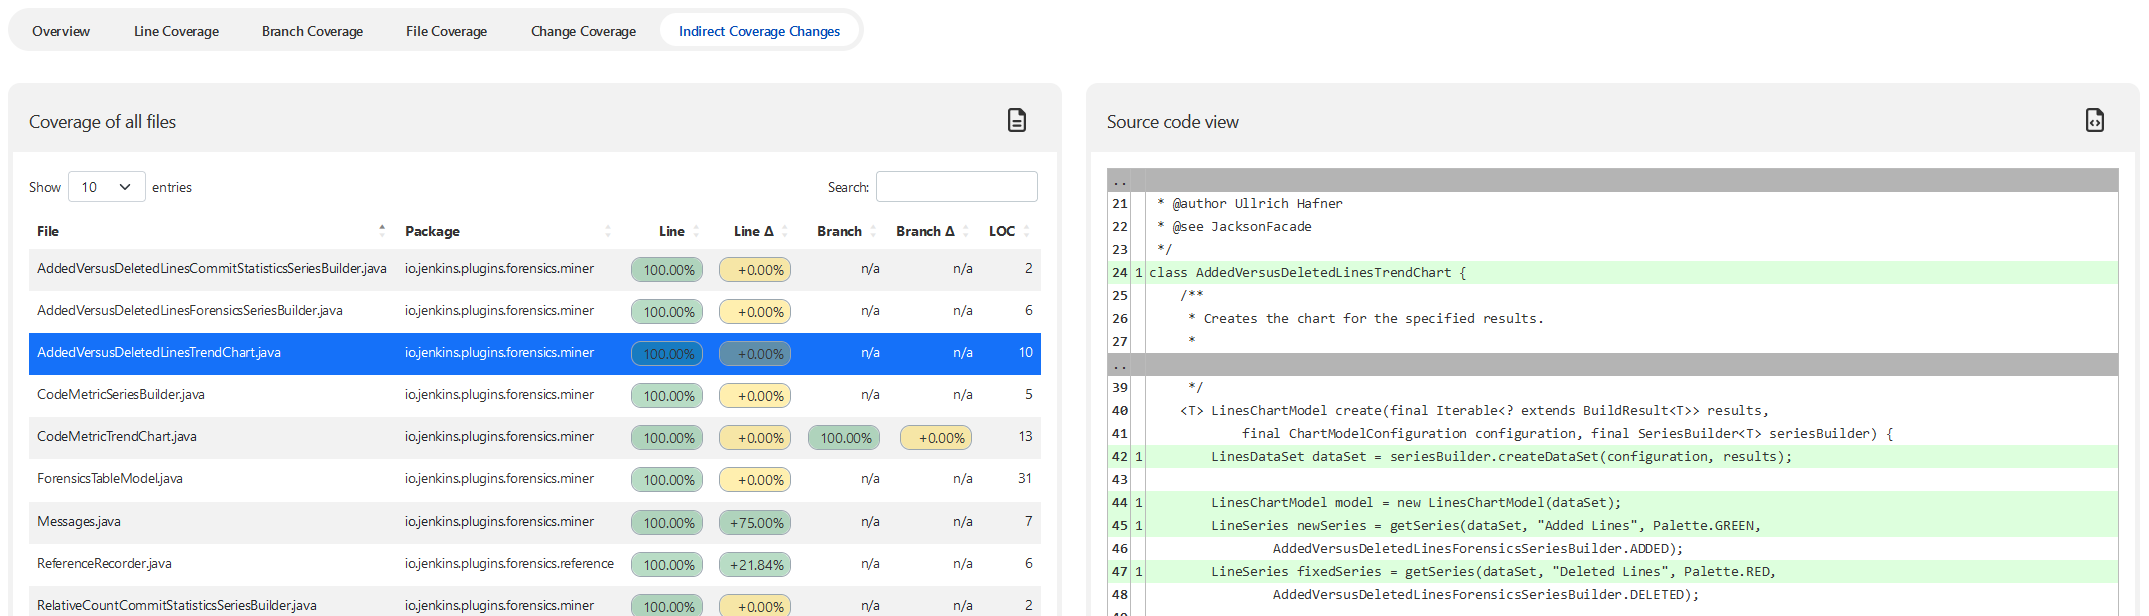 Specific source code view for Indirect Coverage Changes